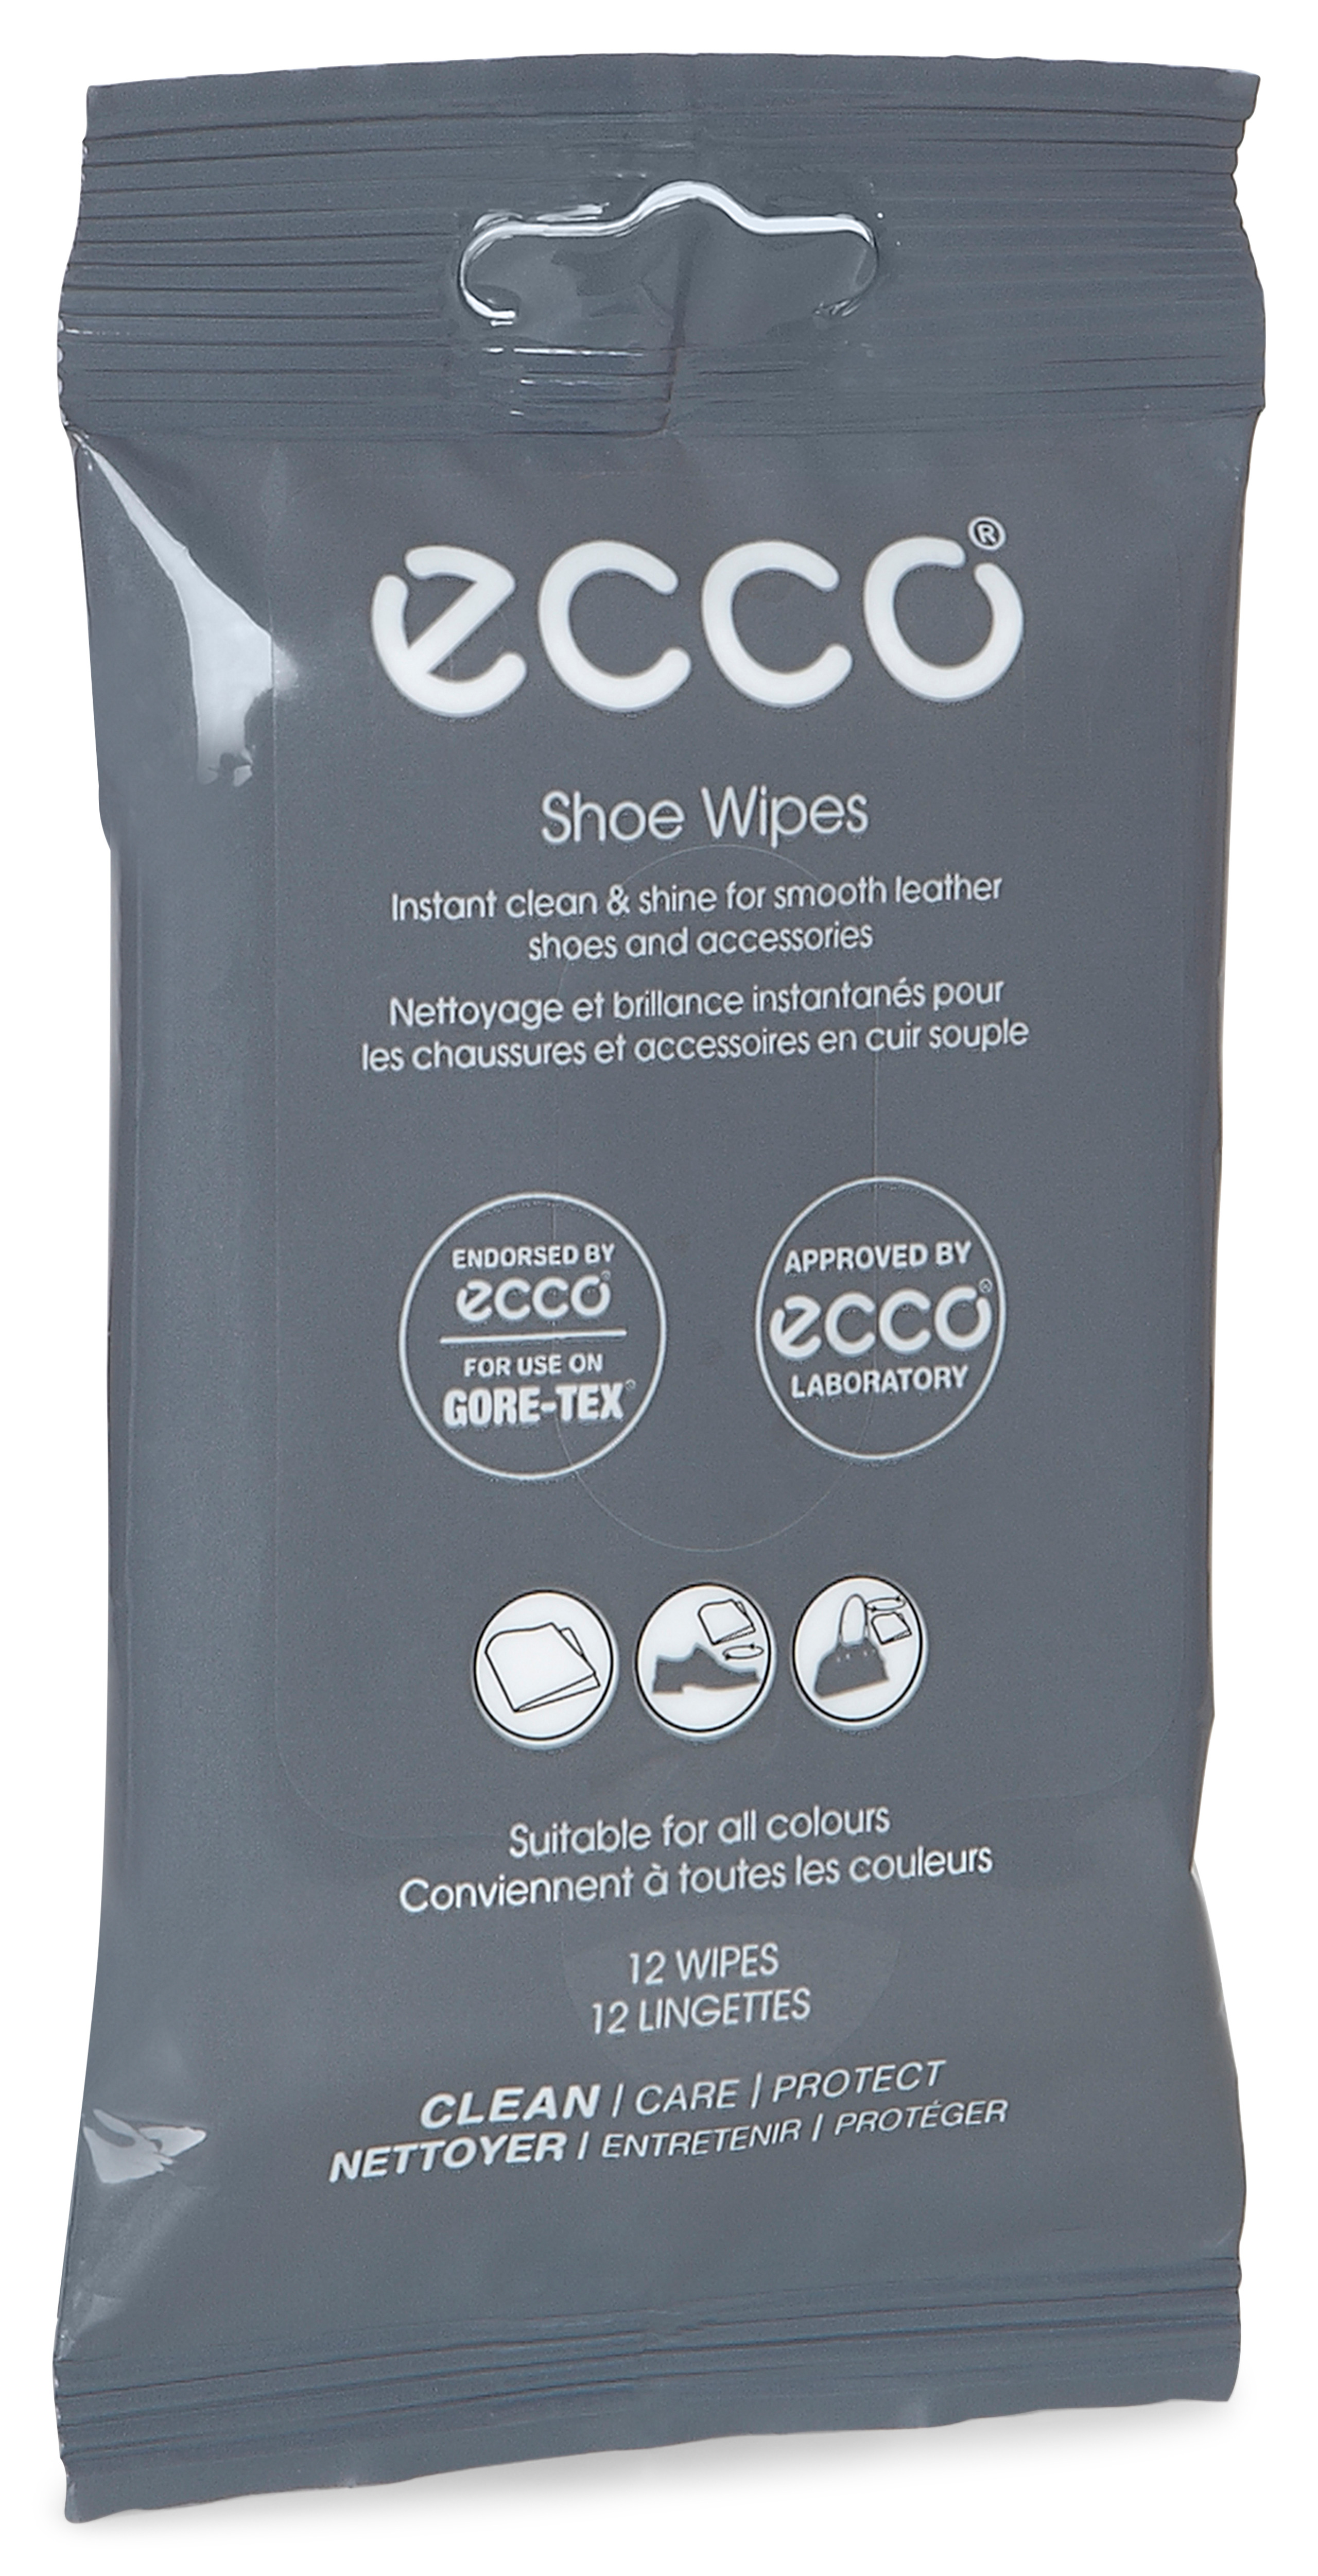 how to clean ecco leather shoes